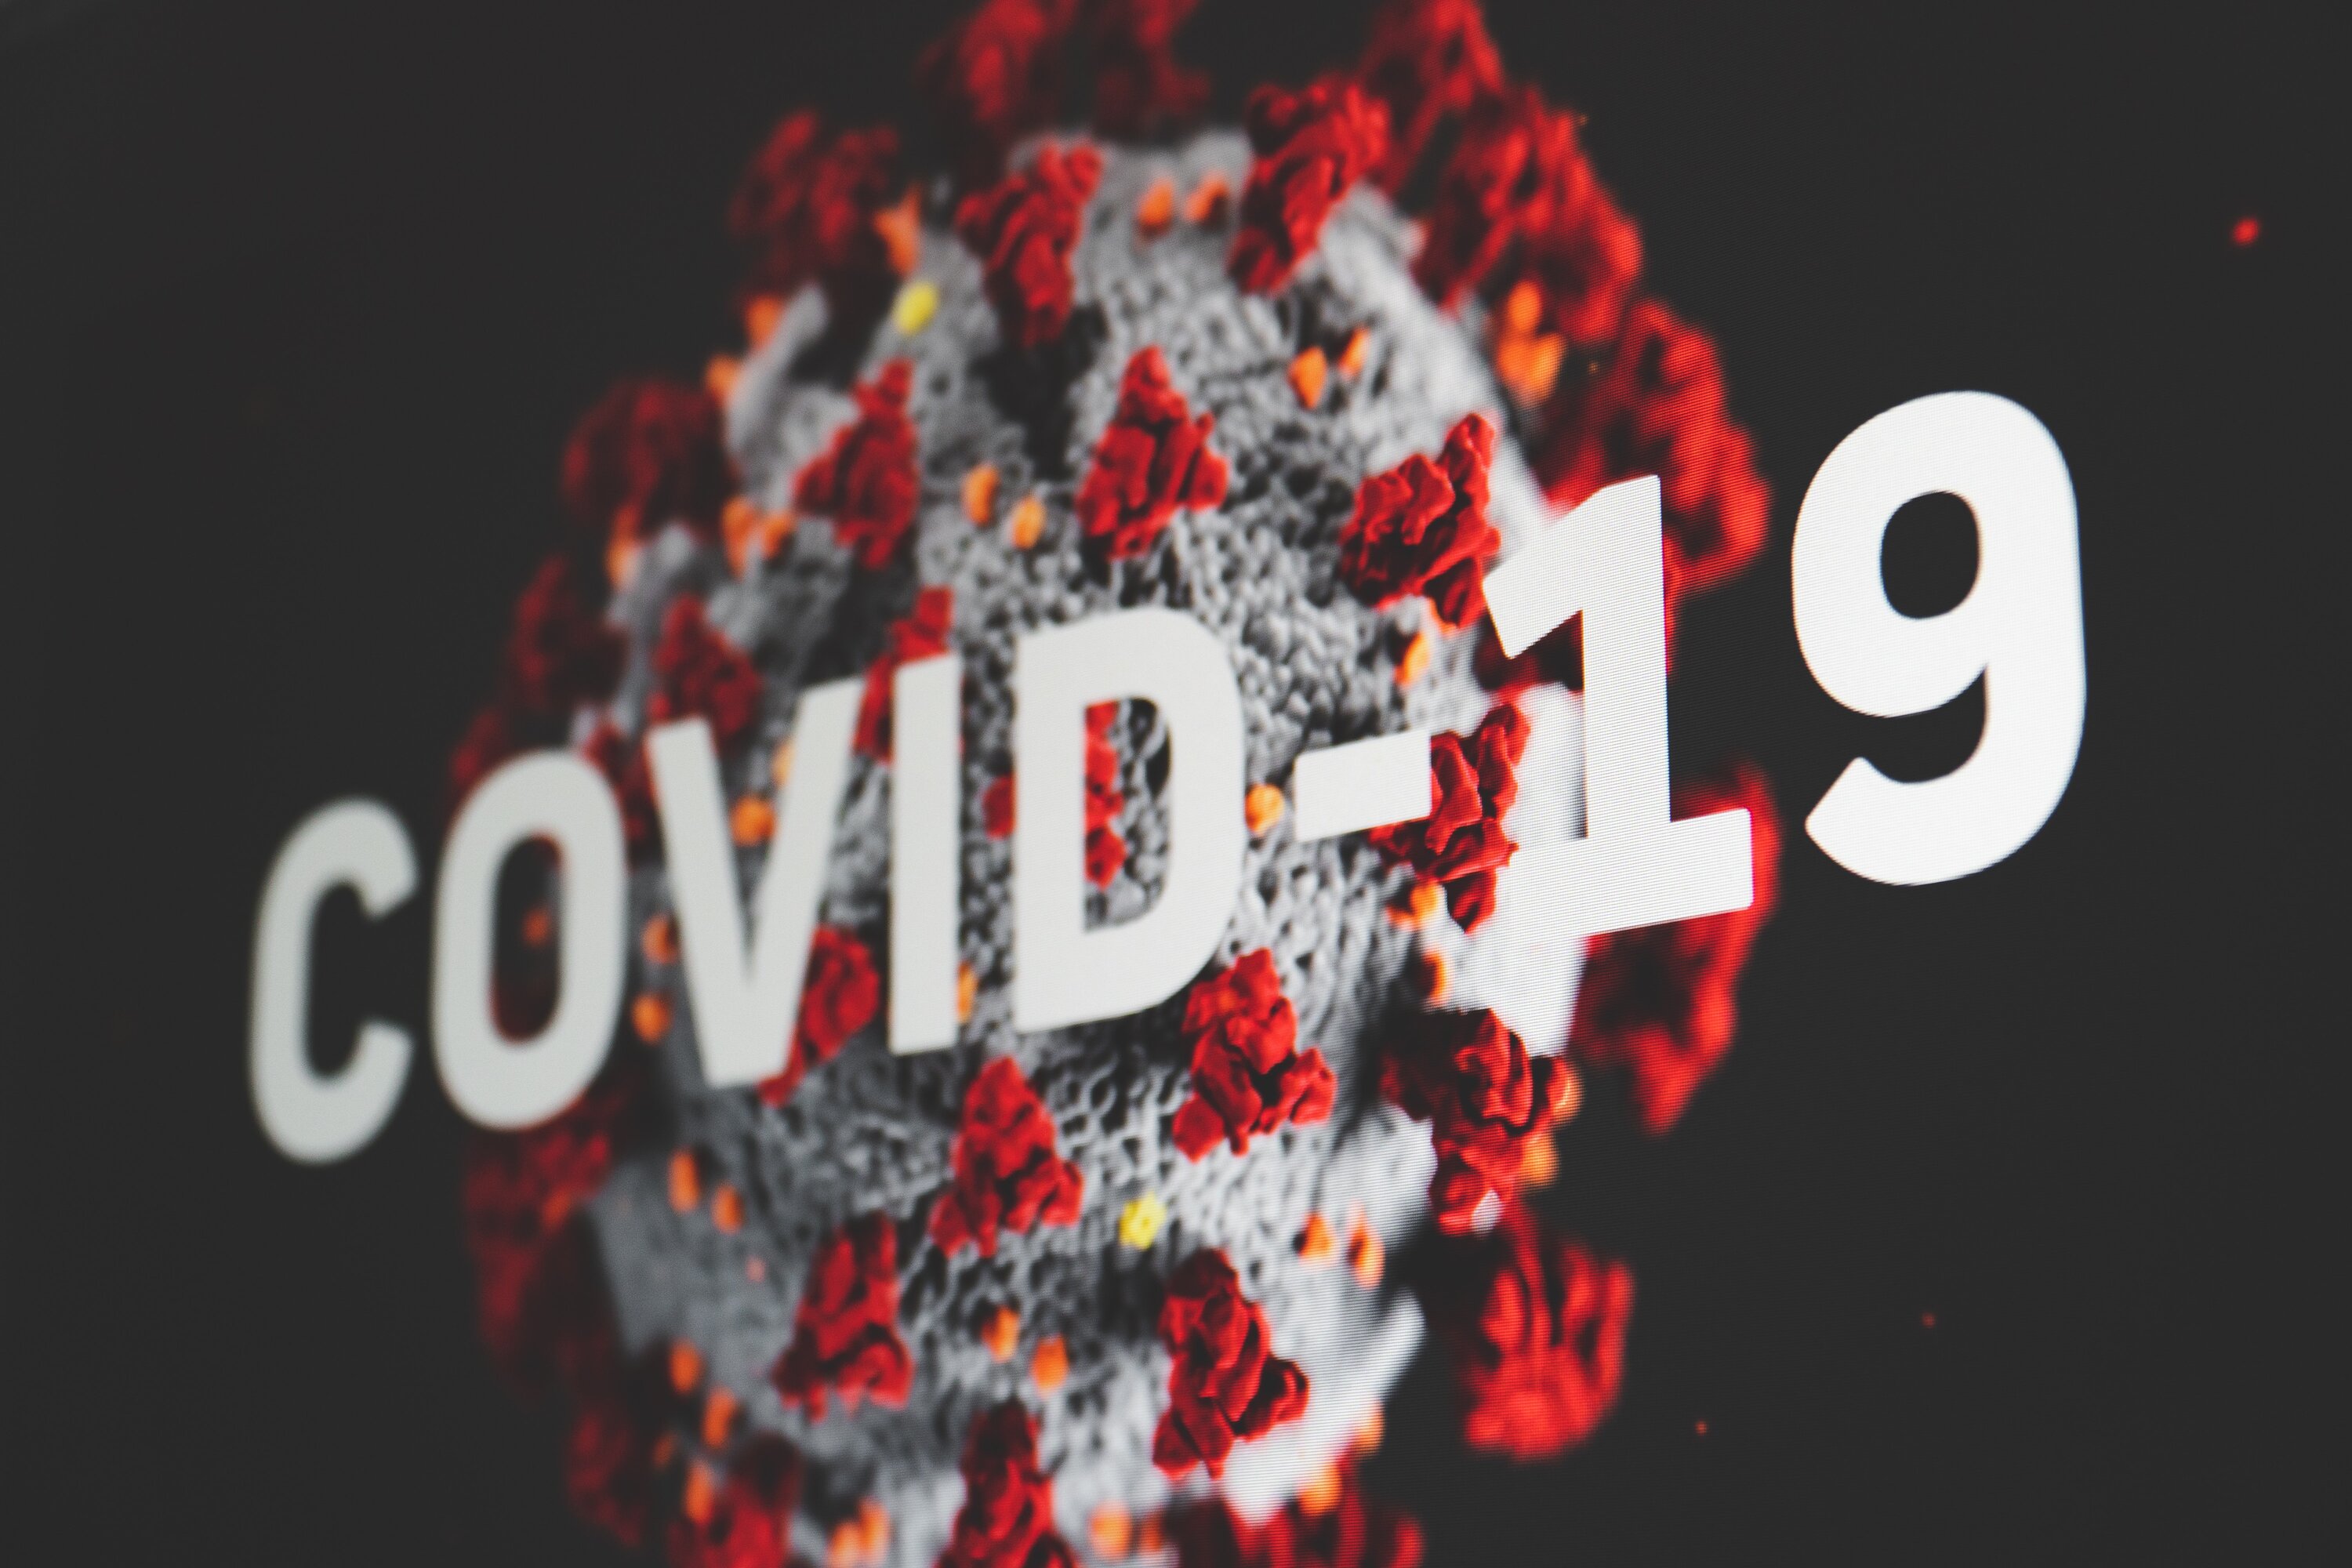 The WTO has launched a new dedicated website to respond to the COVID-19 pandemic